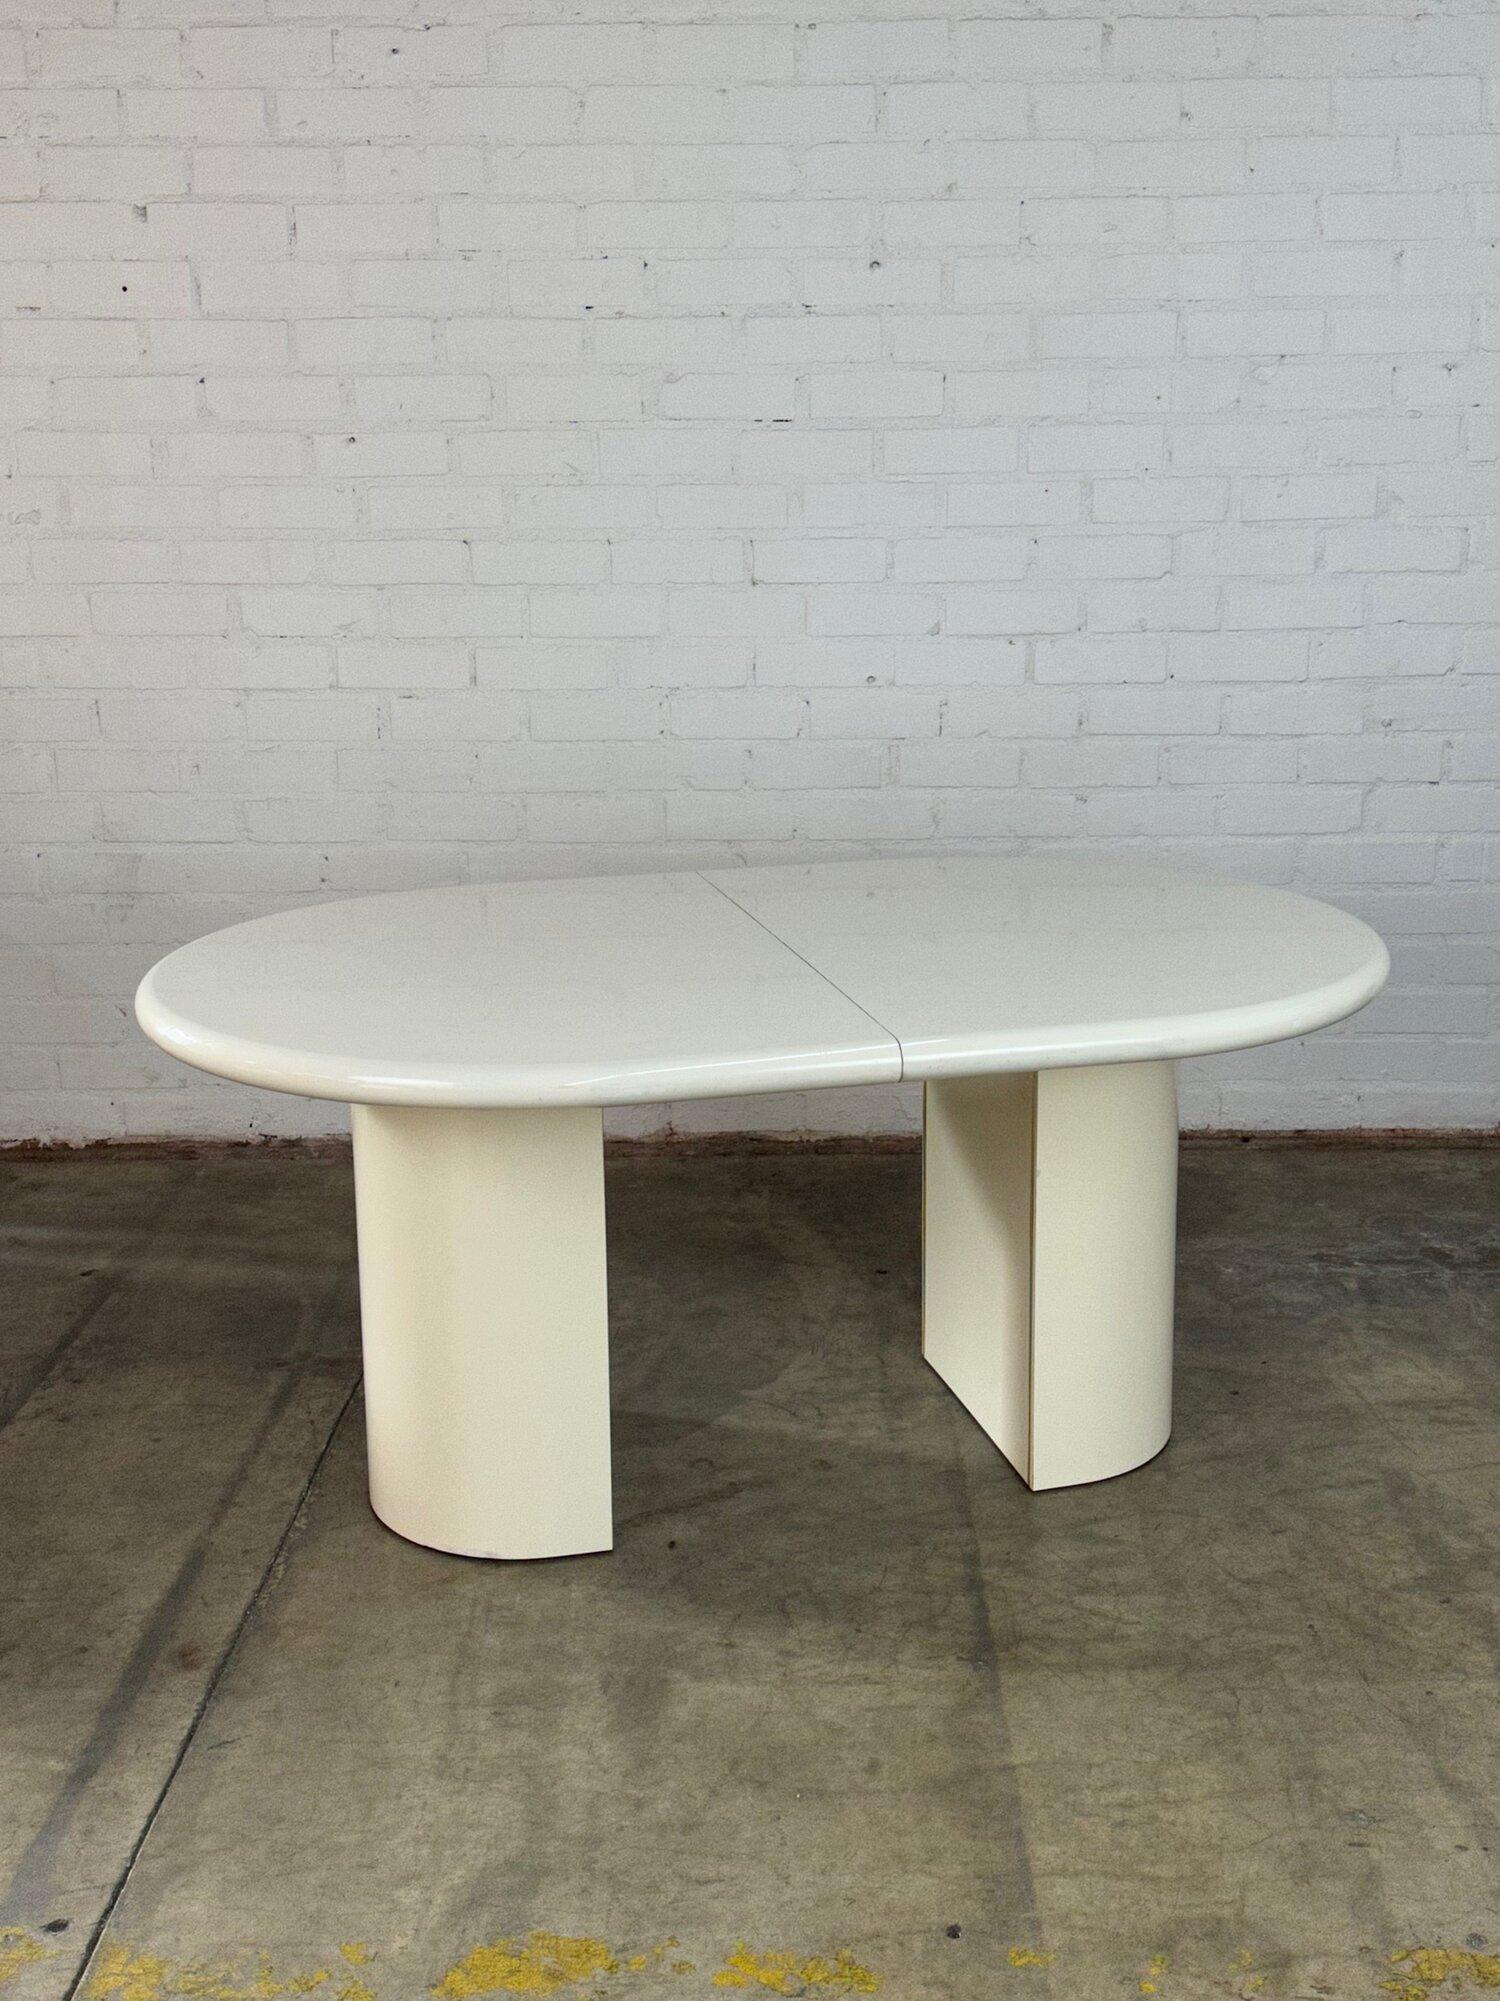 American Post Modern Laminate Dining Table